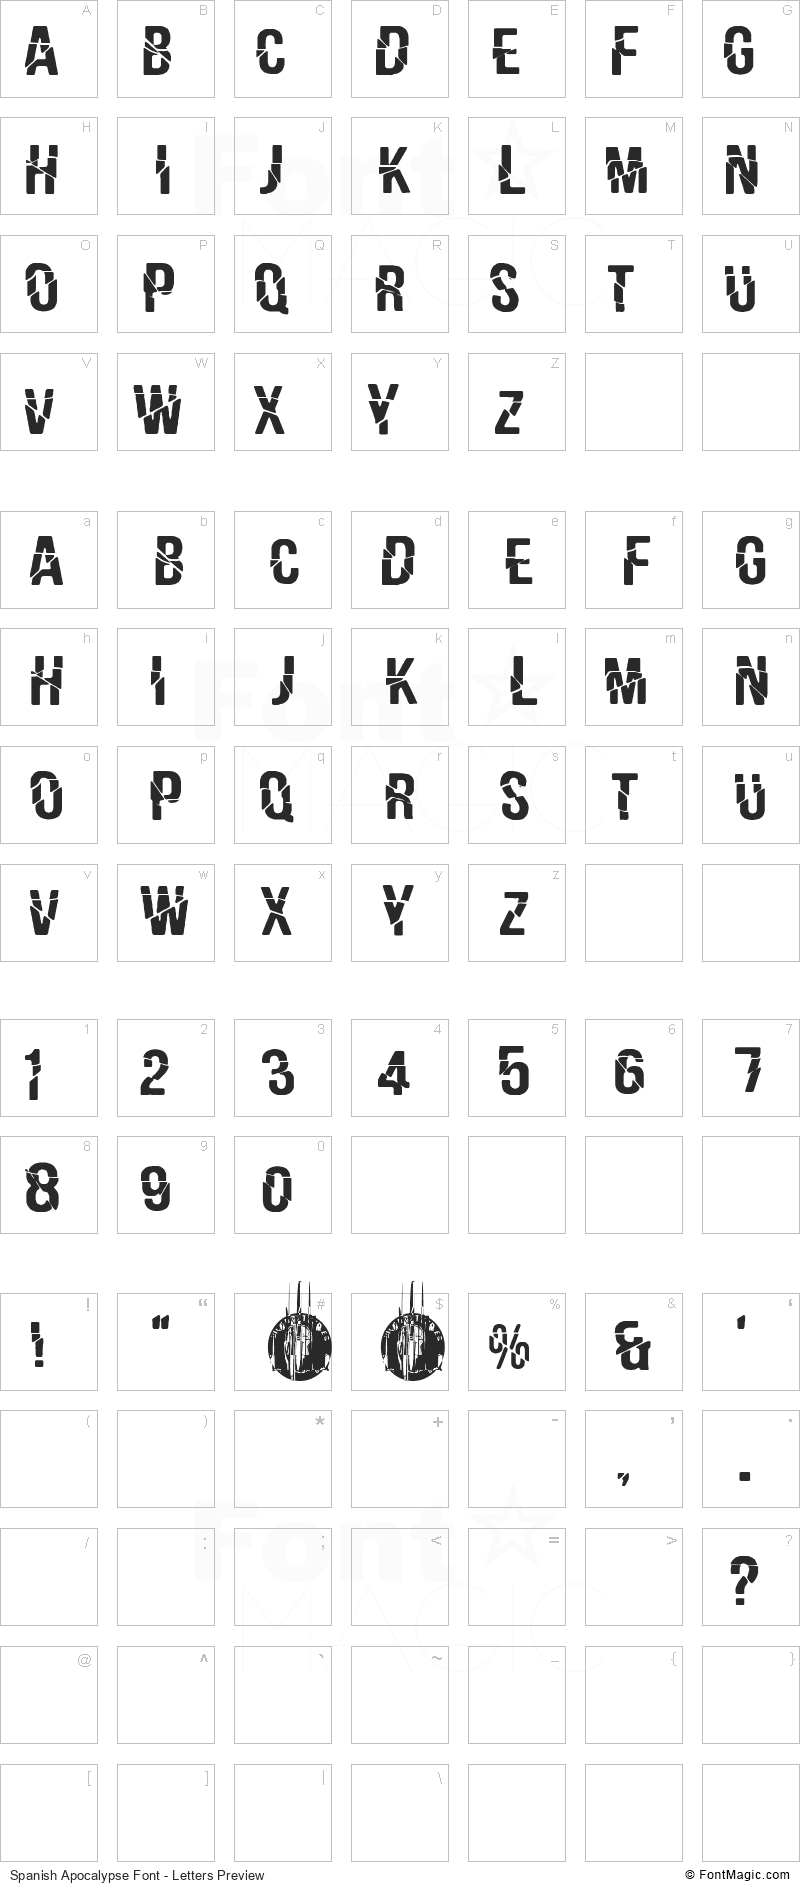 Spanish Apocalypse Font - All Latters Preview Chart